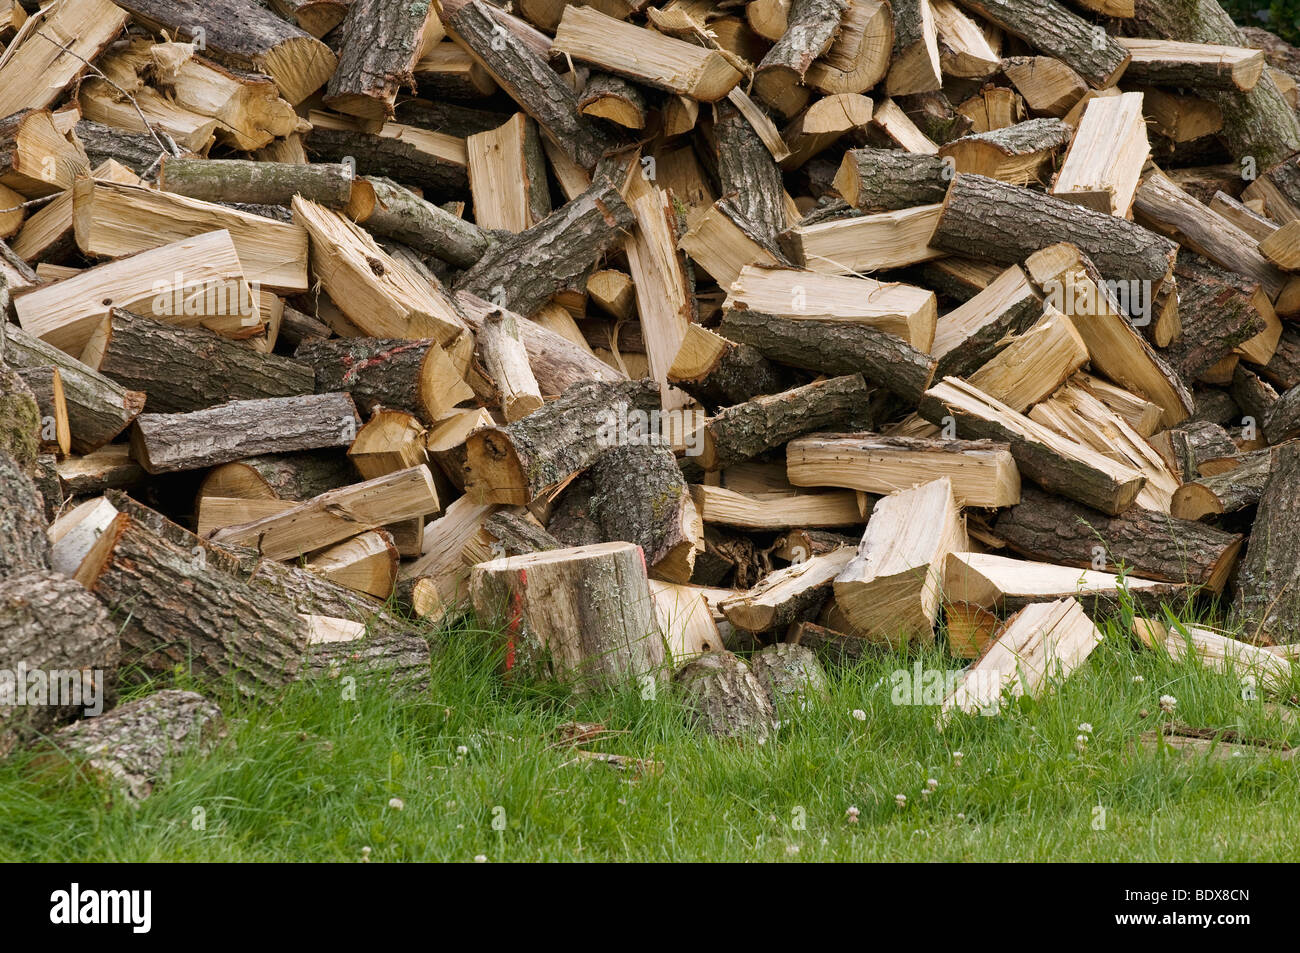 Chopped firewood, piled up logs on a lawn Stock Photo